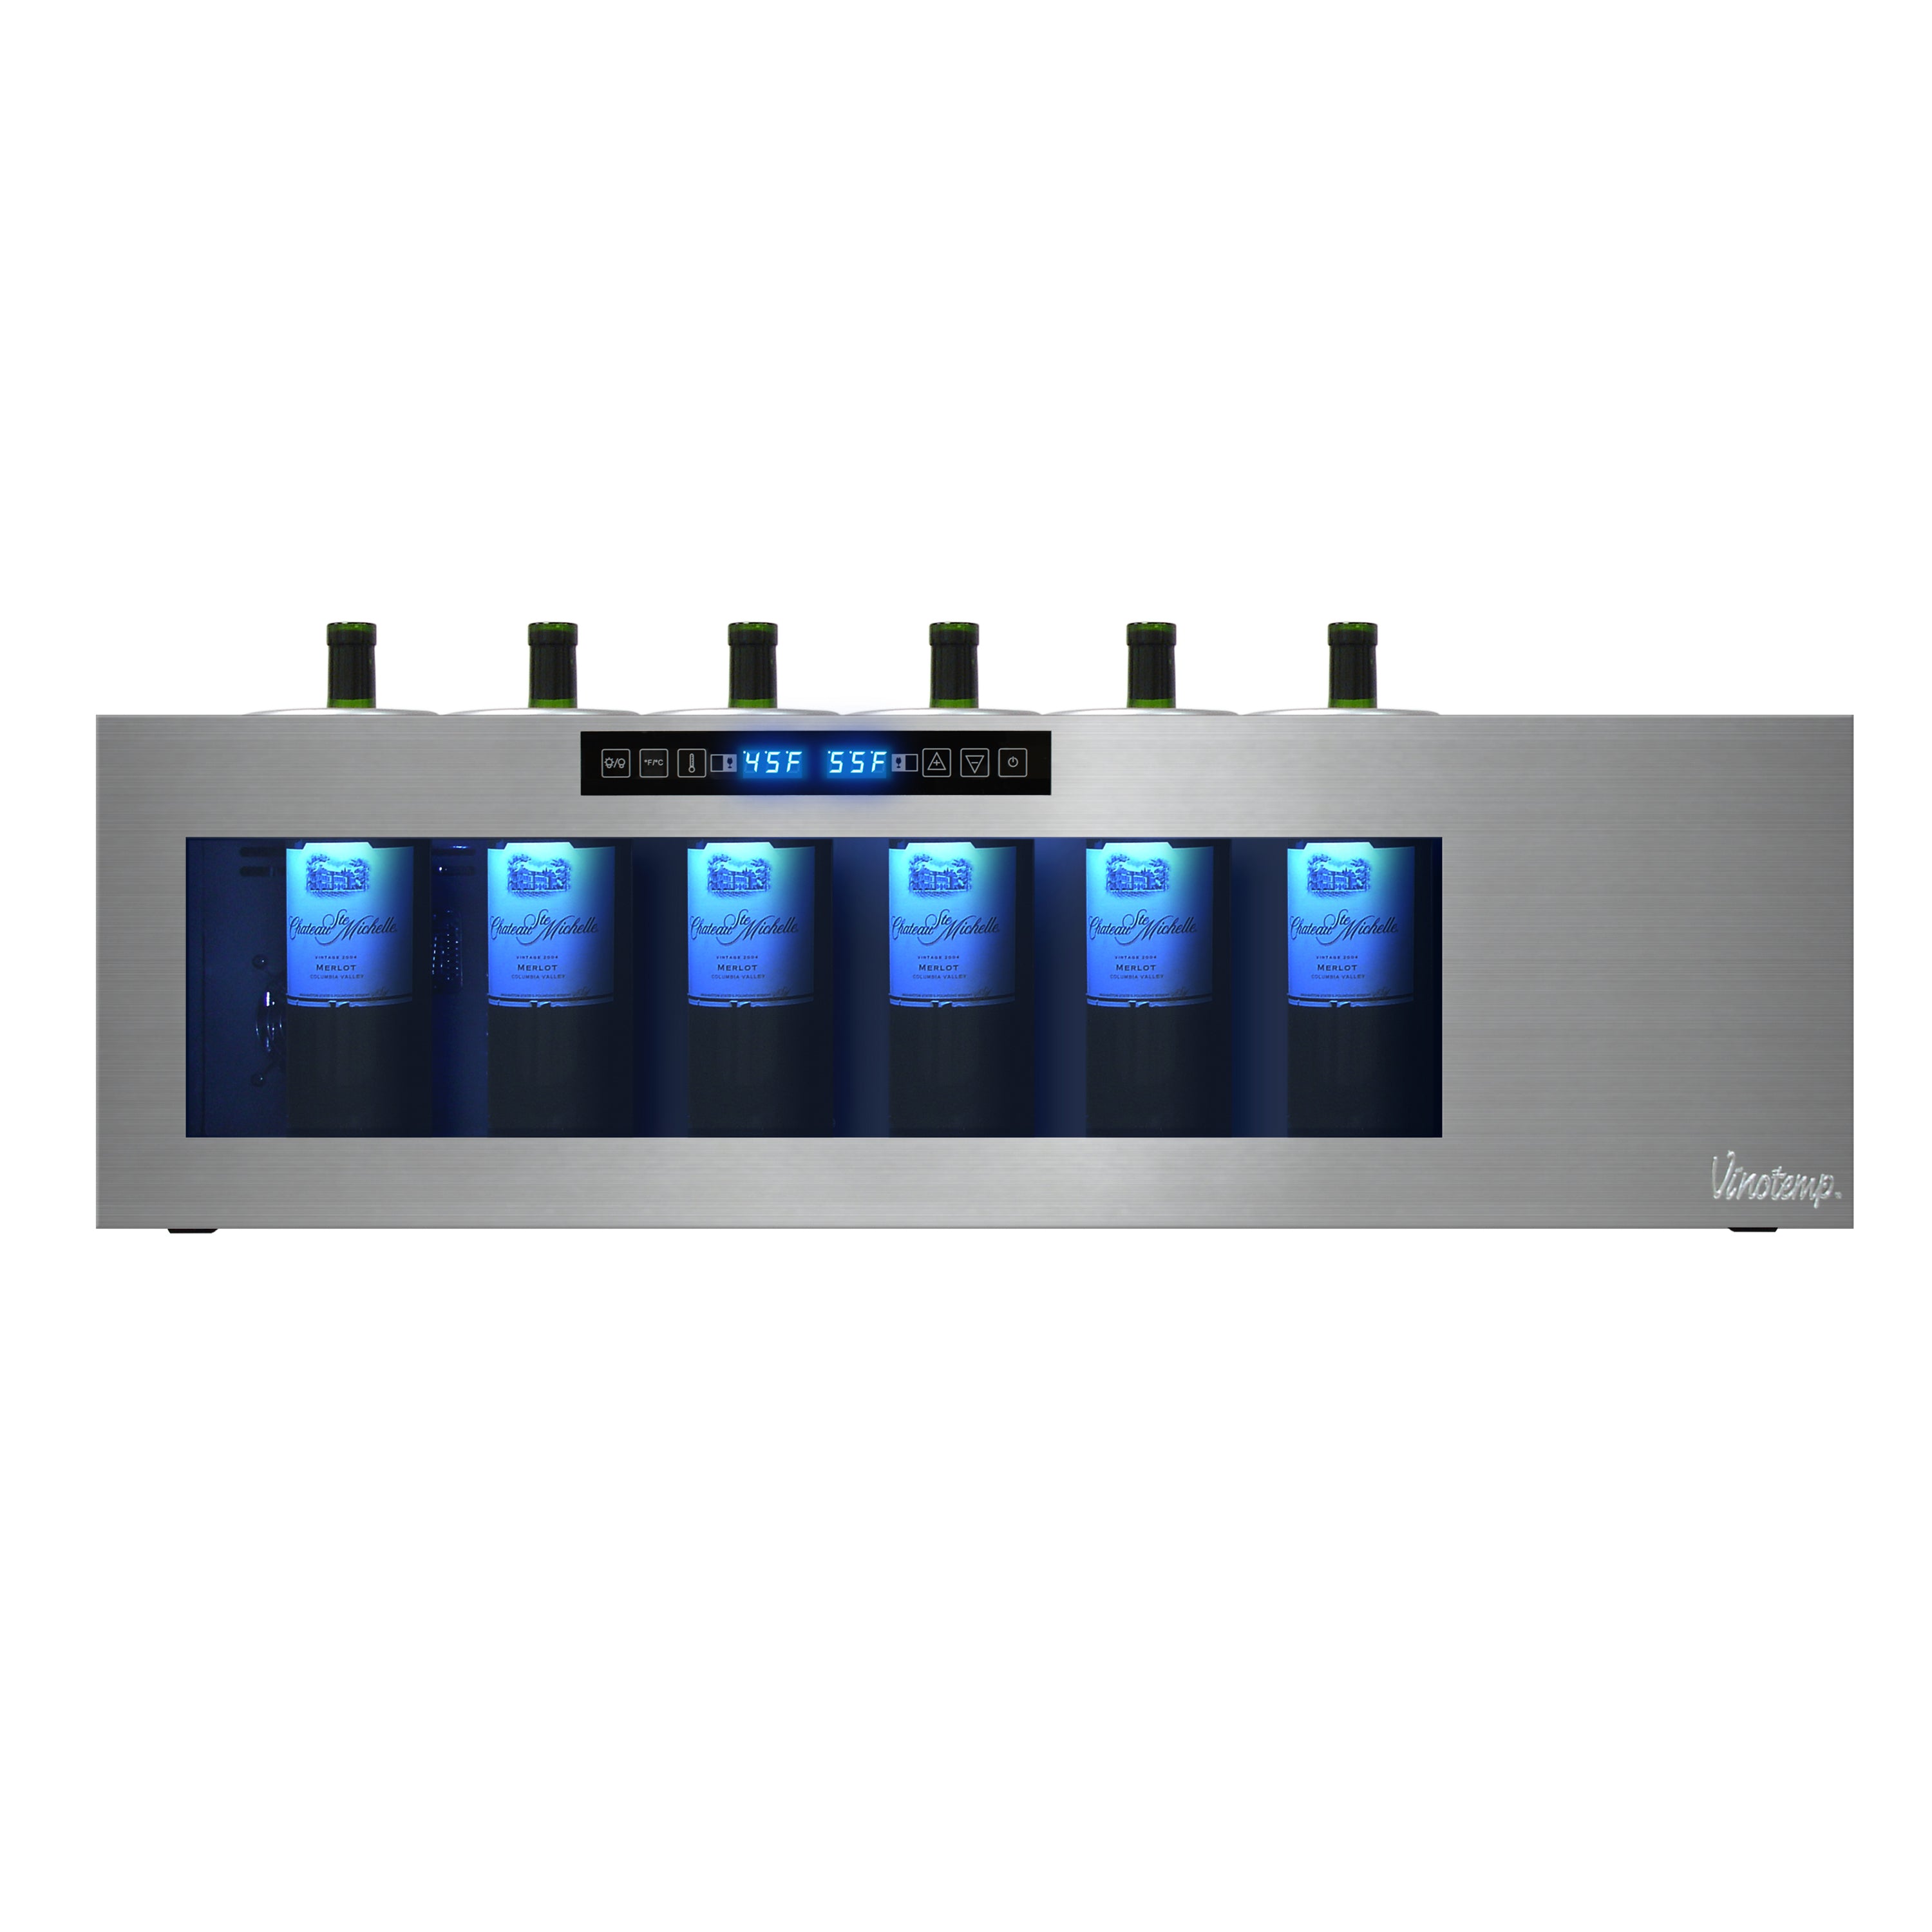 Vinotemp - IL-OW006-2Z, Vinotemp Il Romanzo Series Dual-Zone Open Display Wine Cooler, 6 Bottle Capacity, in Stainless Steel